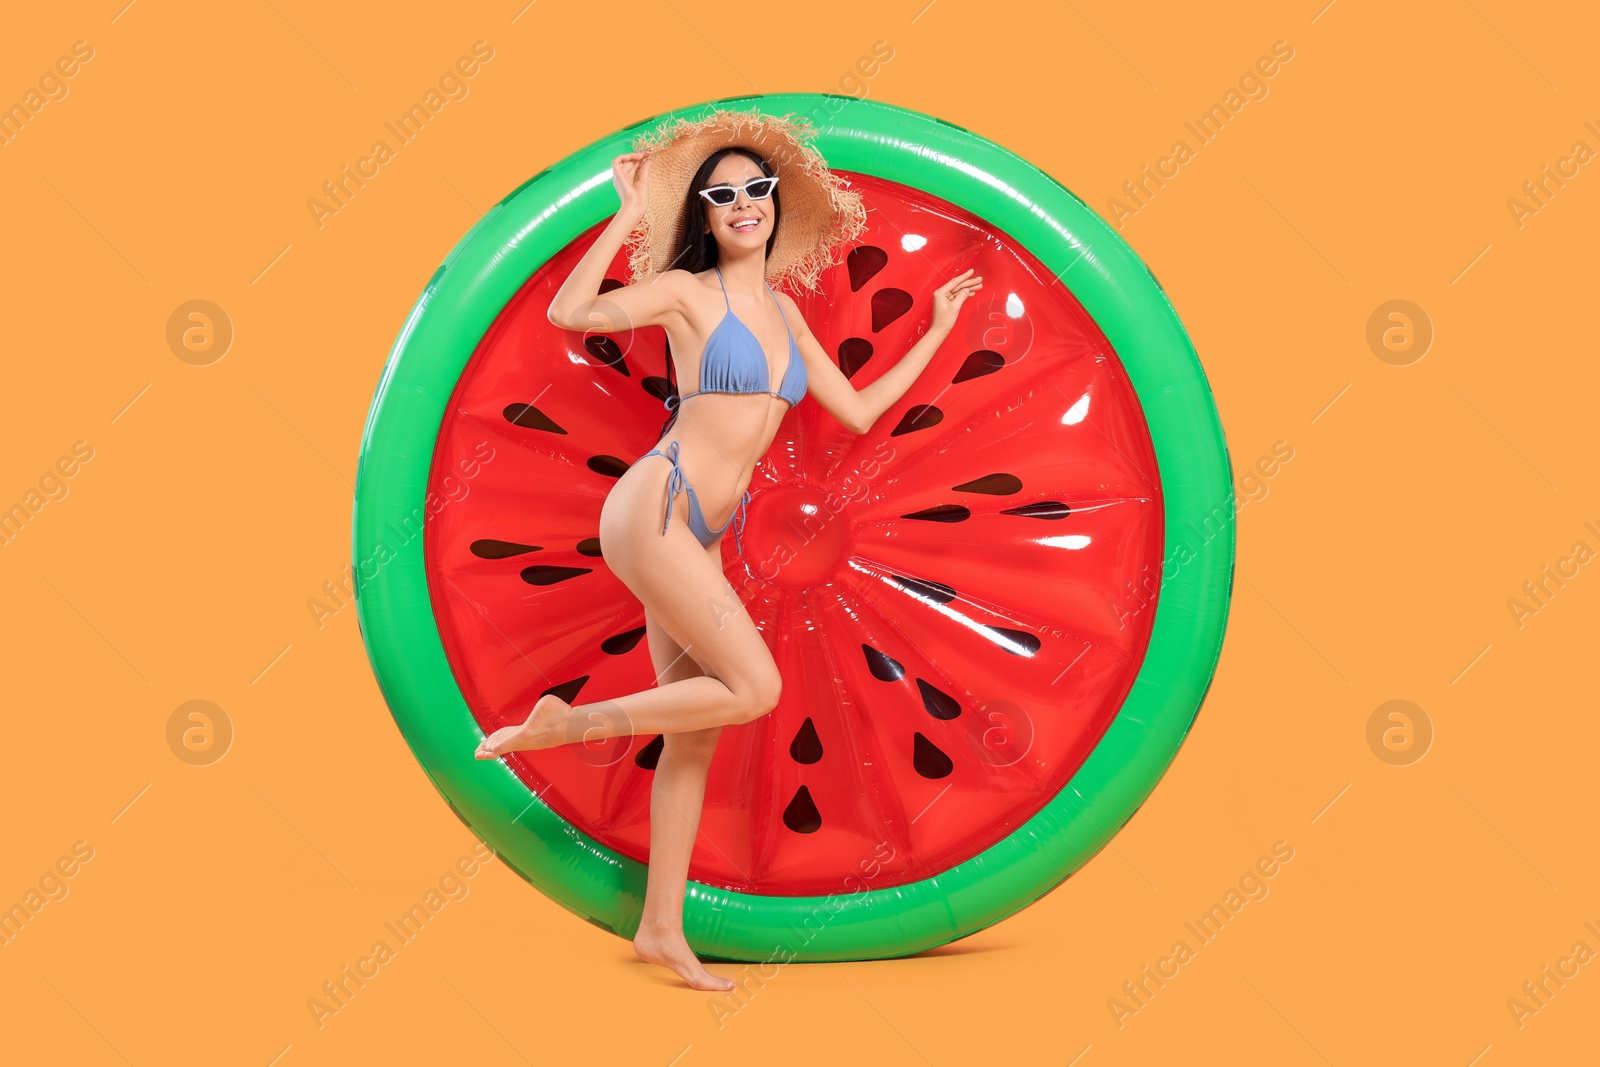 Photo of Happy young woman with beautiful suntan, hat, sunglasses and inflatable mattress against orange background